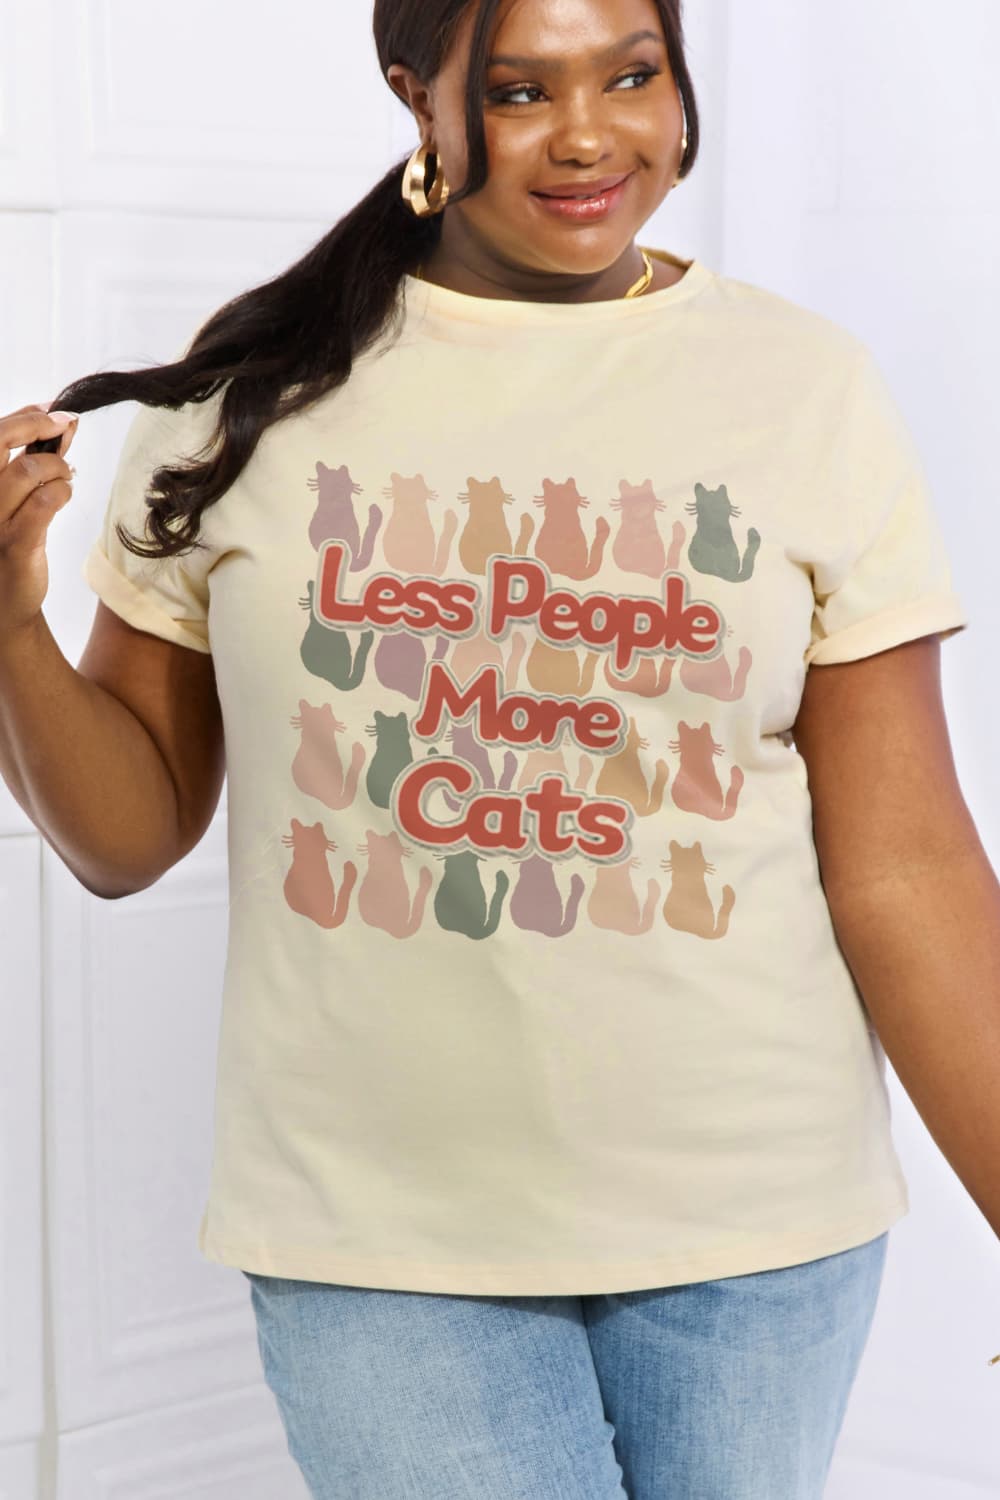 LESS PEOPLE MORE CATS Graphic Cotton Tee - T-Shirts - Shirts & Tops - 16 - 2024